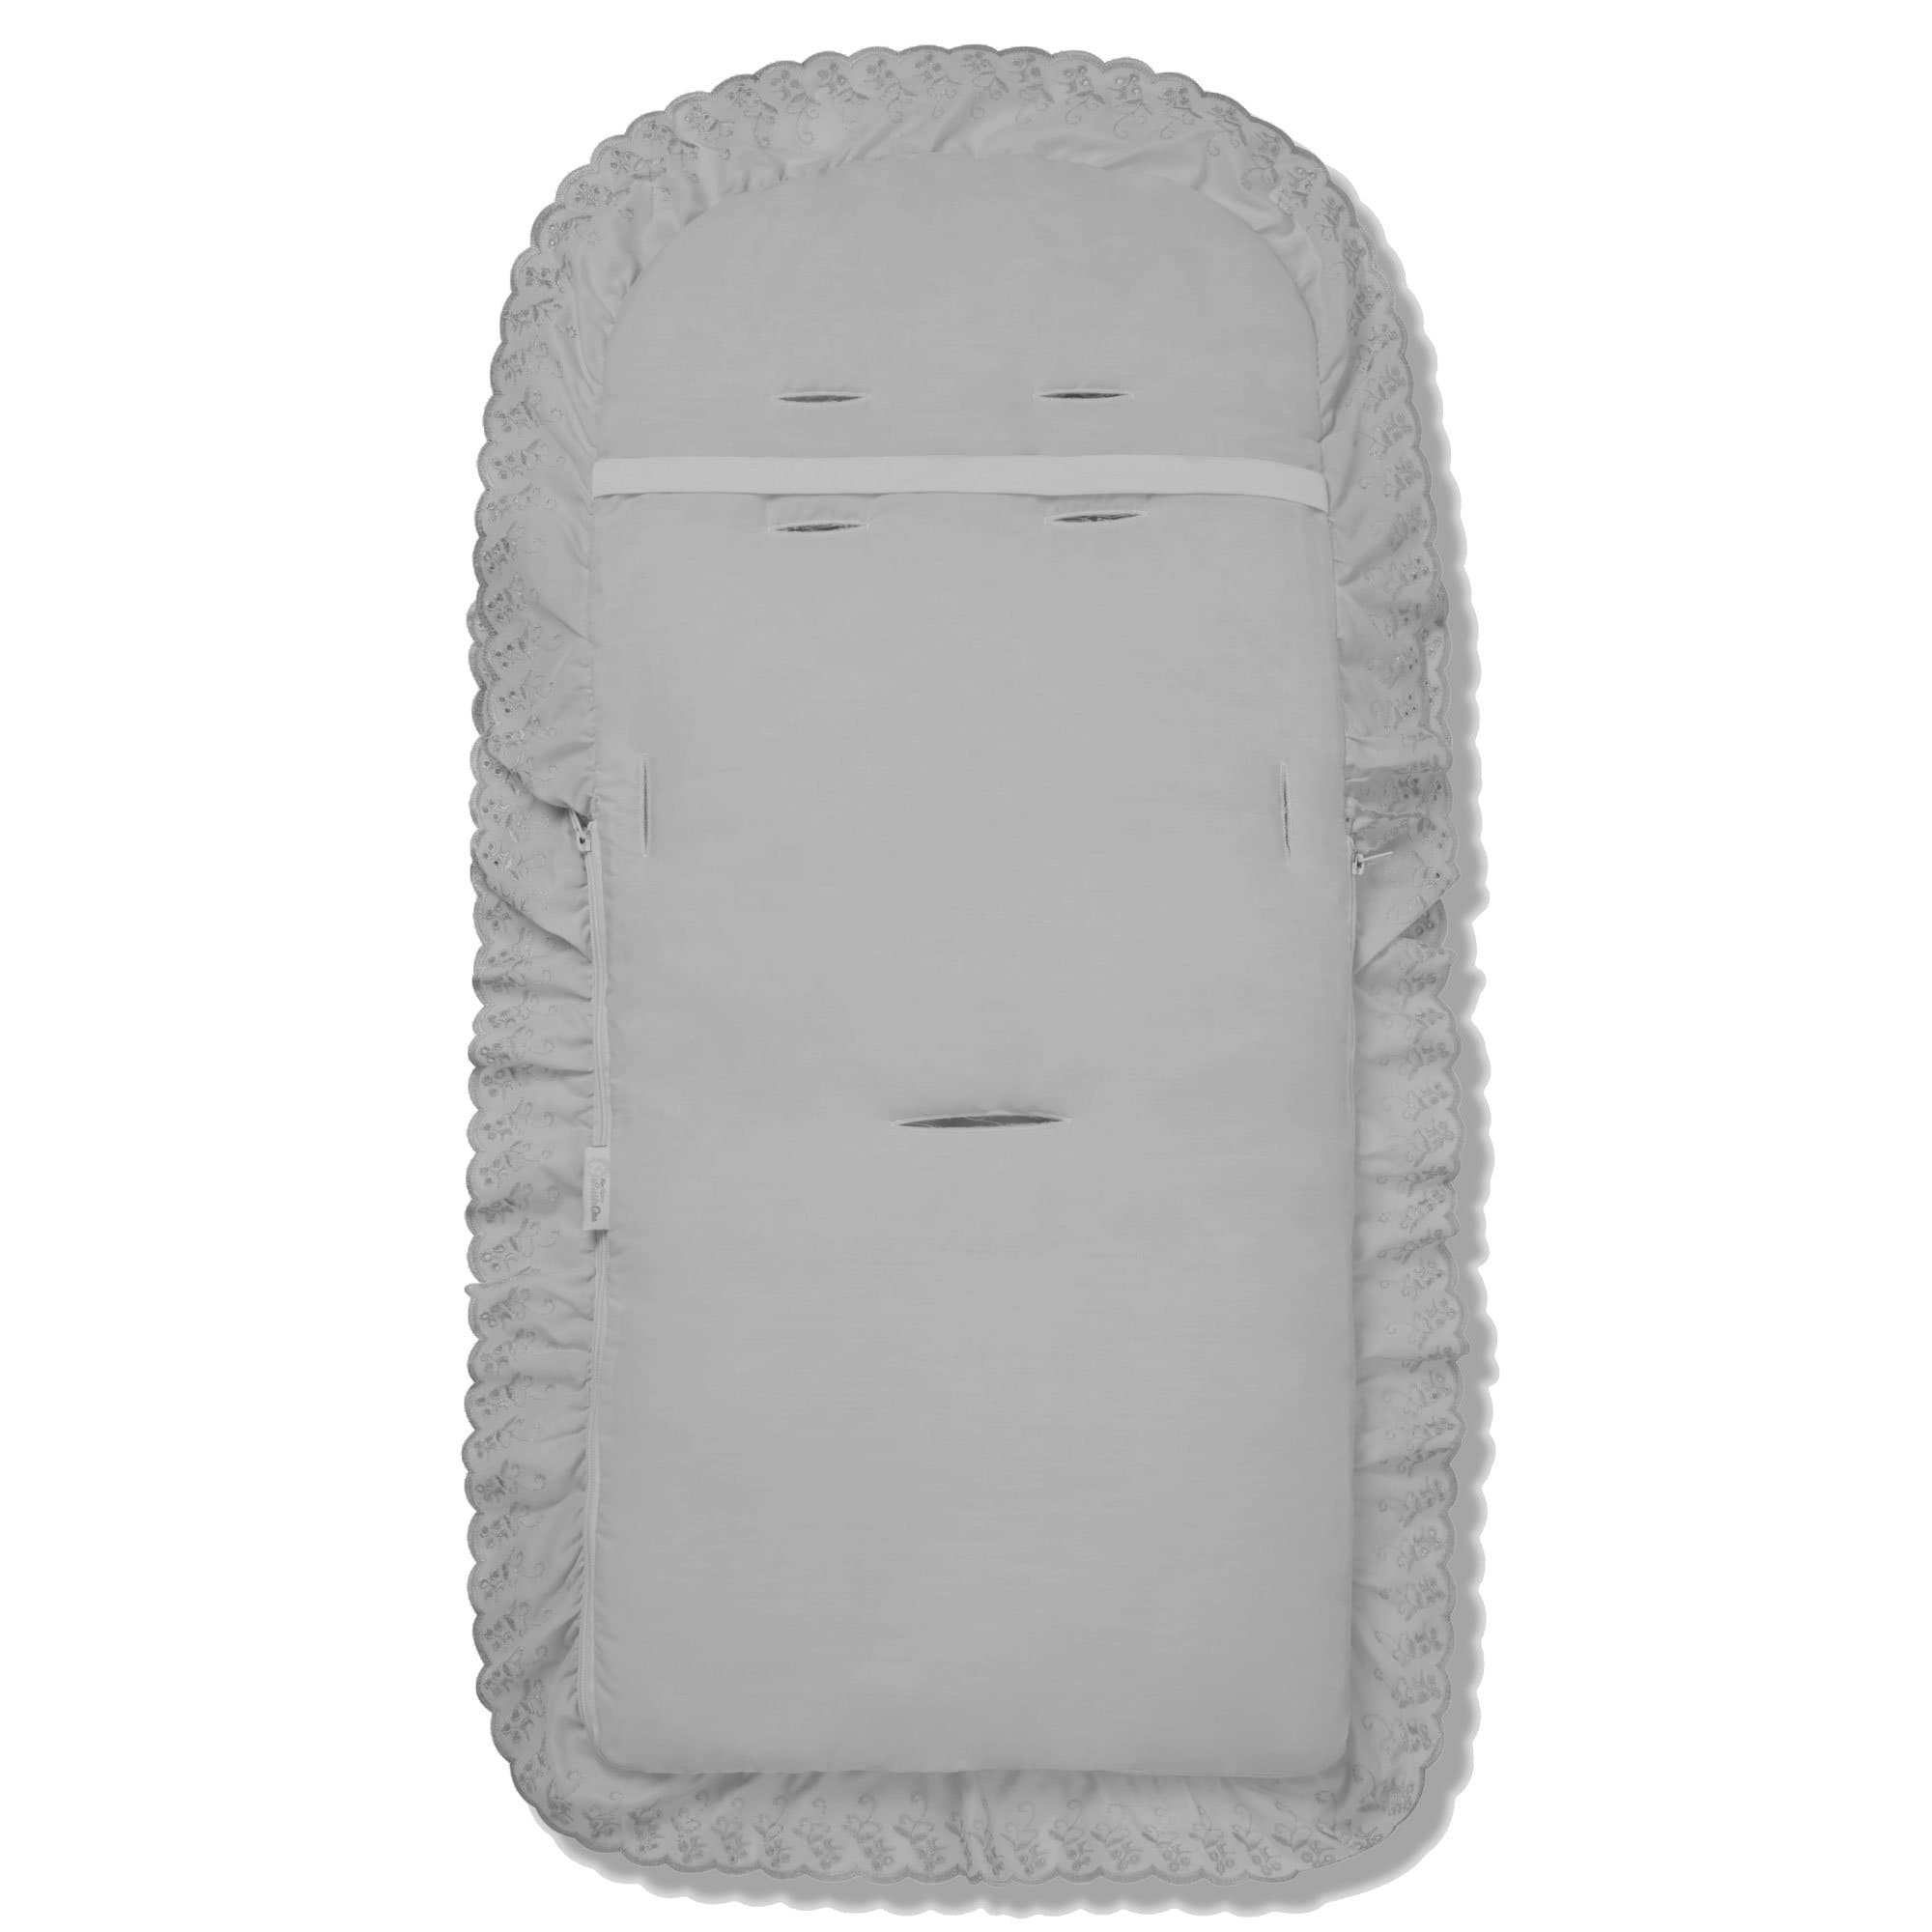 Broderie Anglaise Footmuff / Cosy Toes Compatible with BabyDan - For Your Little One